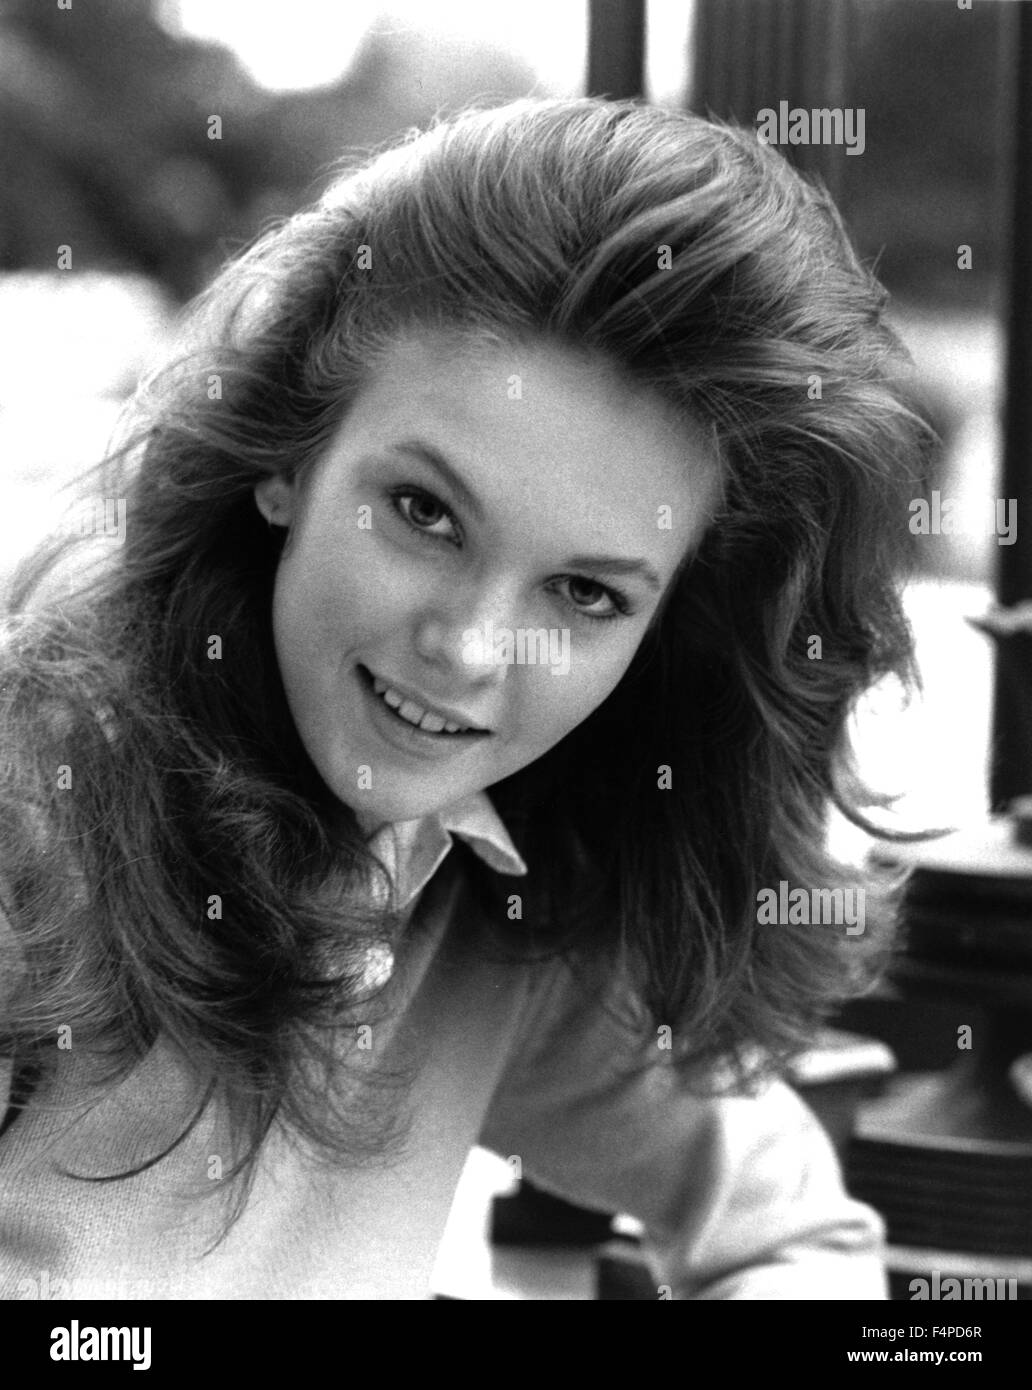 Diane lane / The Outsiders 1982 directed by Francis Ford Coppola Stock Photo